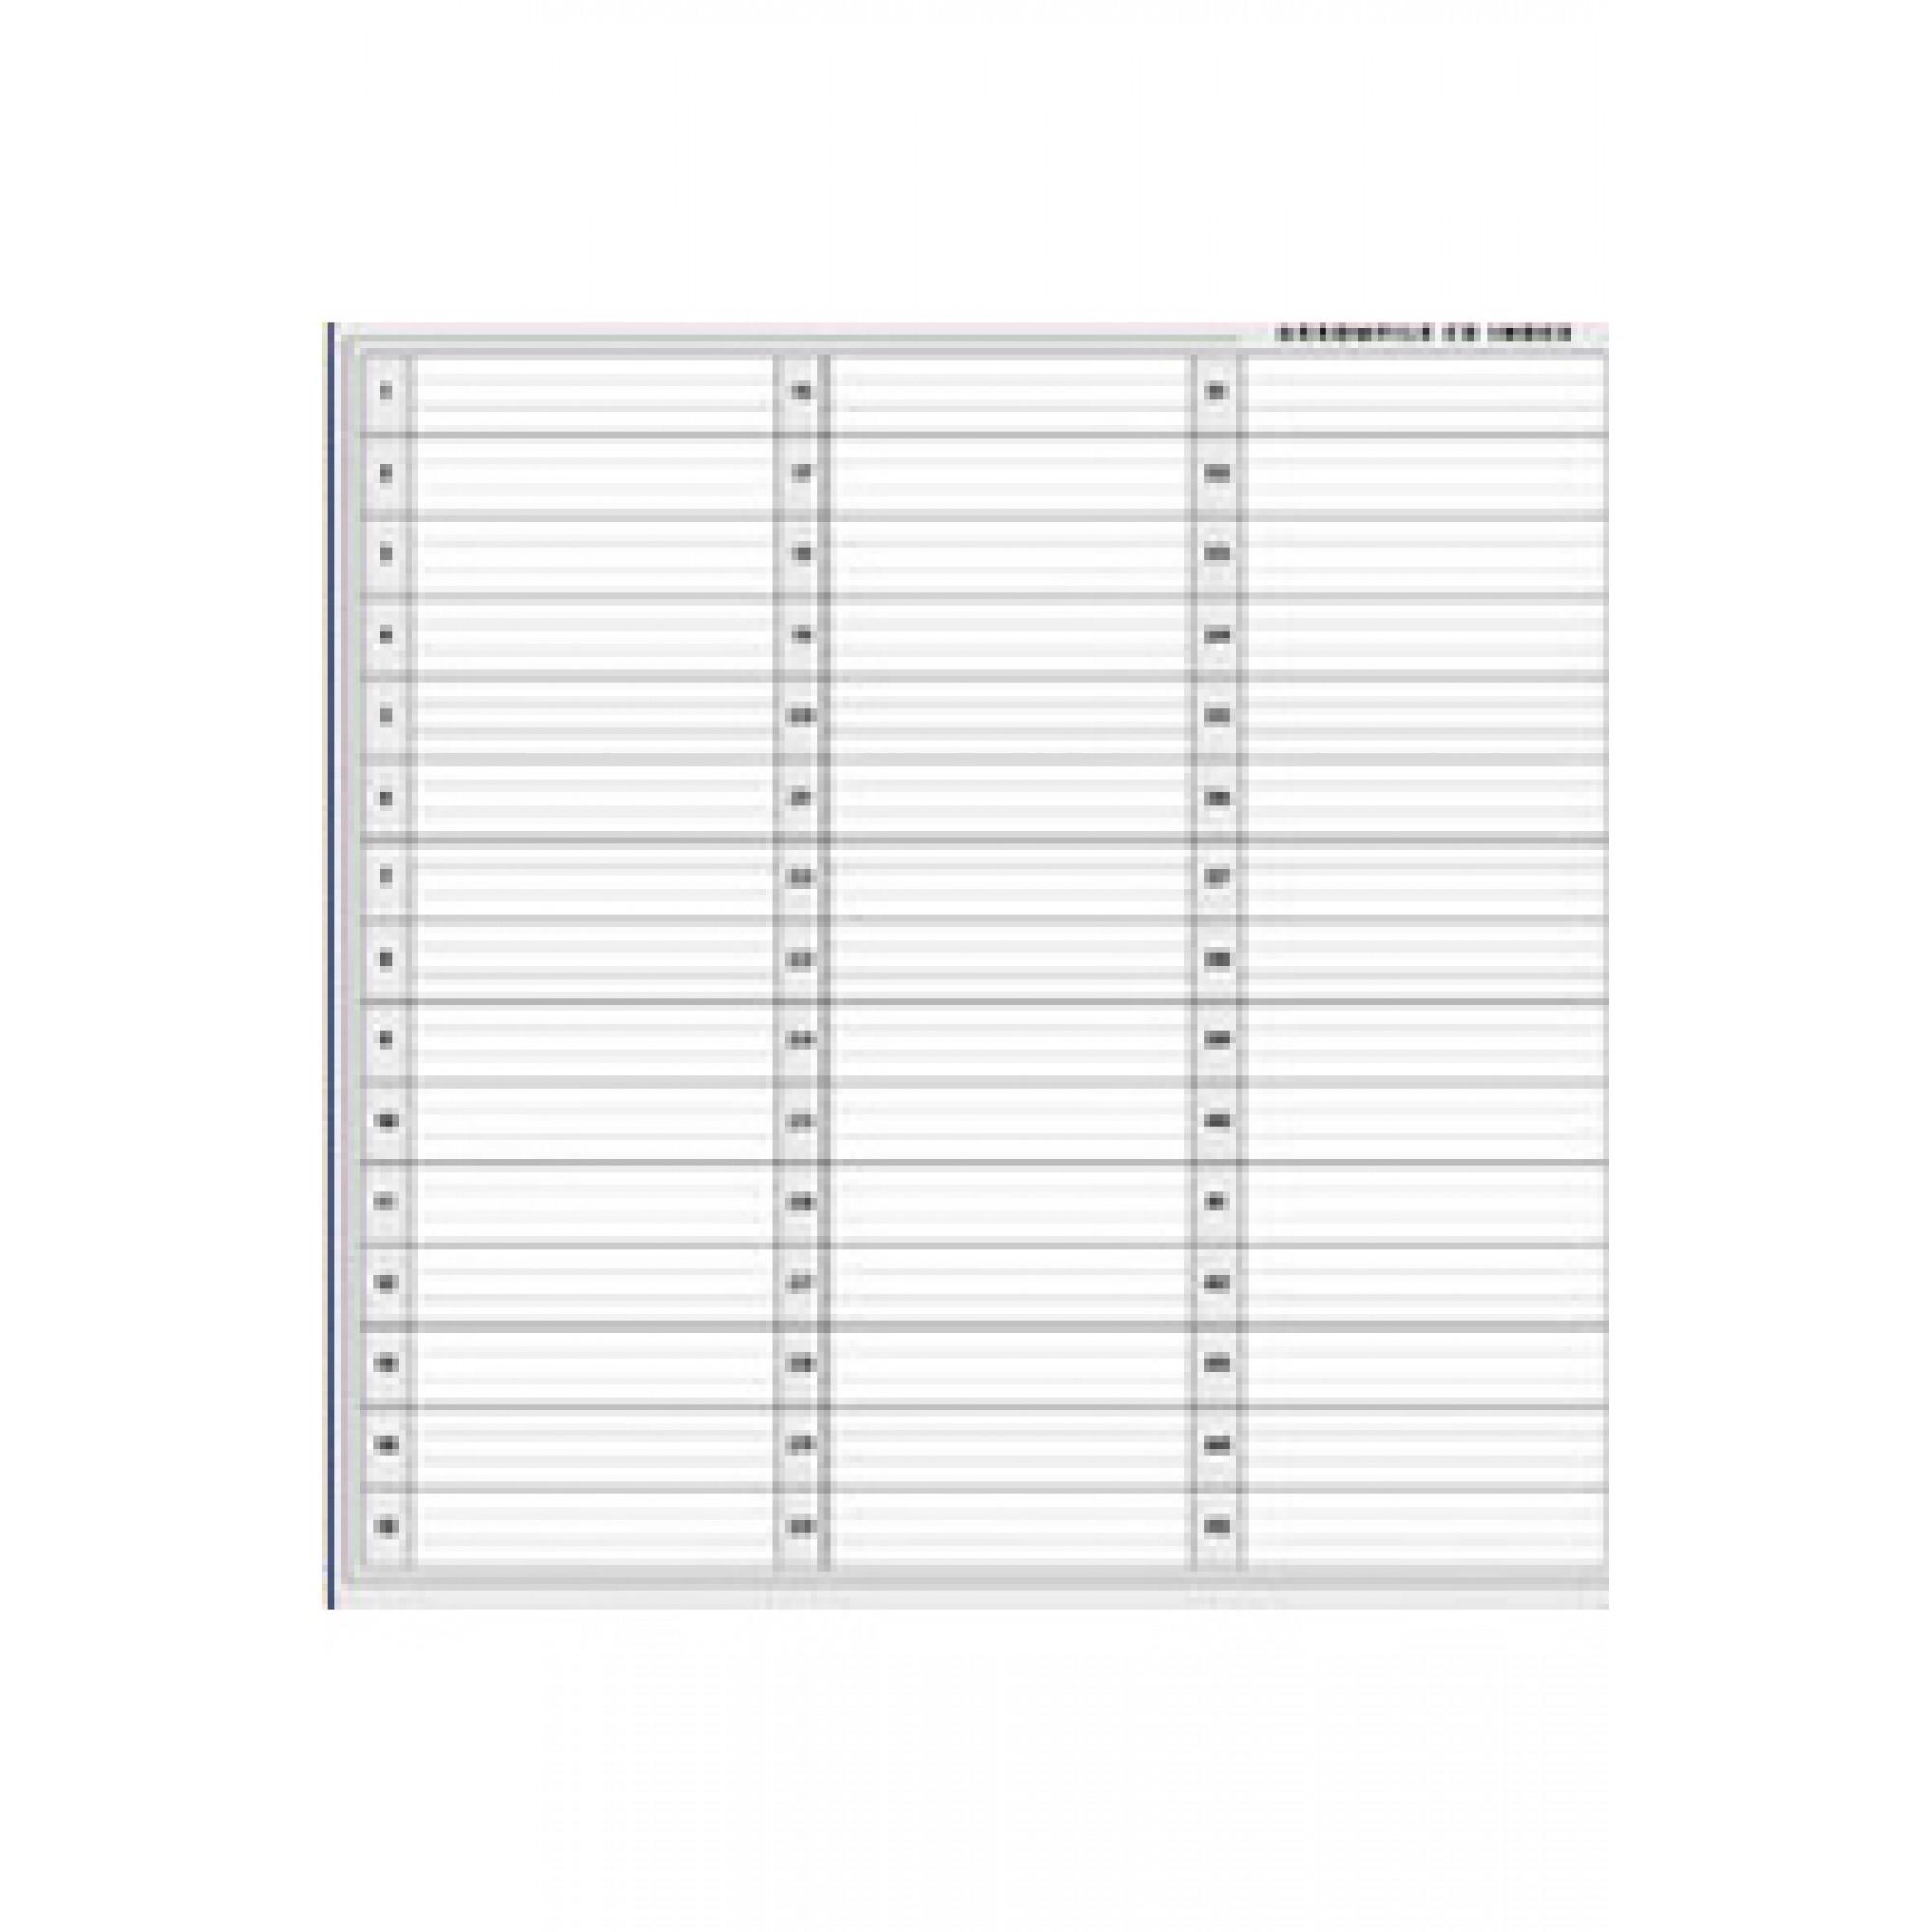 CD/DVD Index Sheets (1 set of 2 pages)